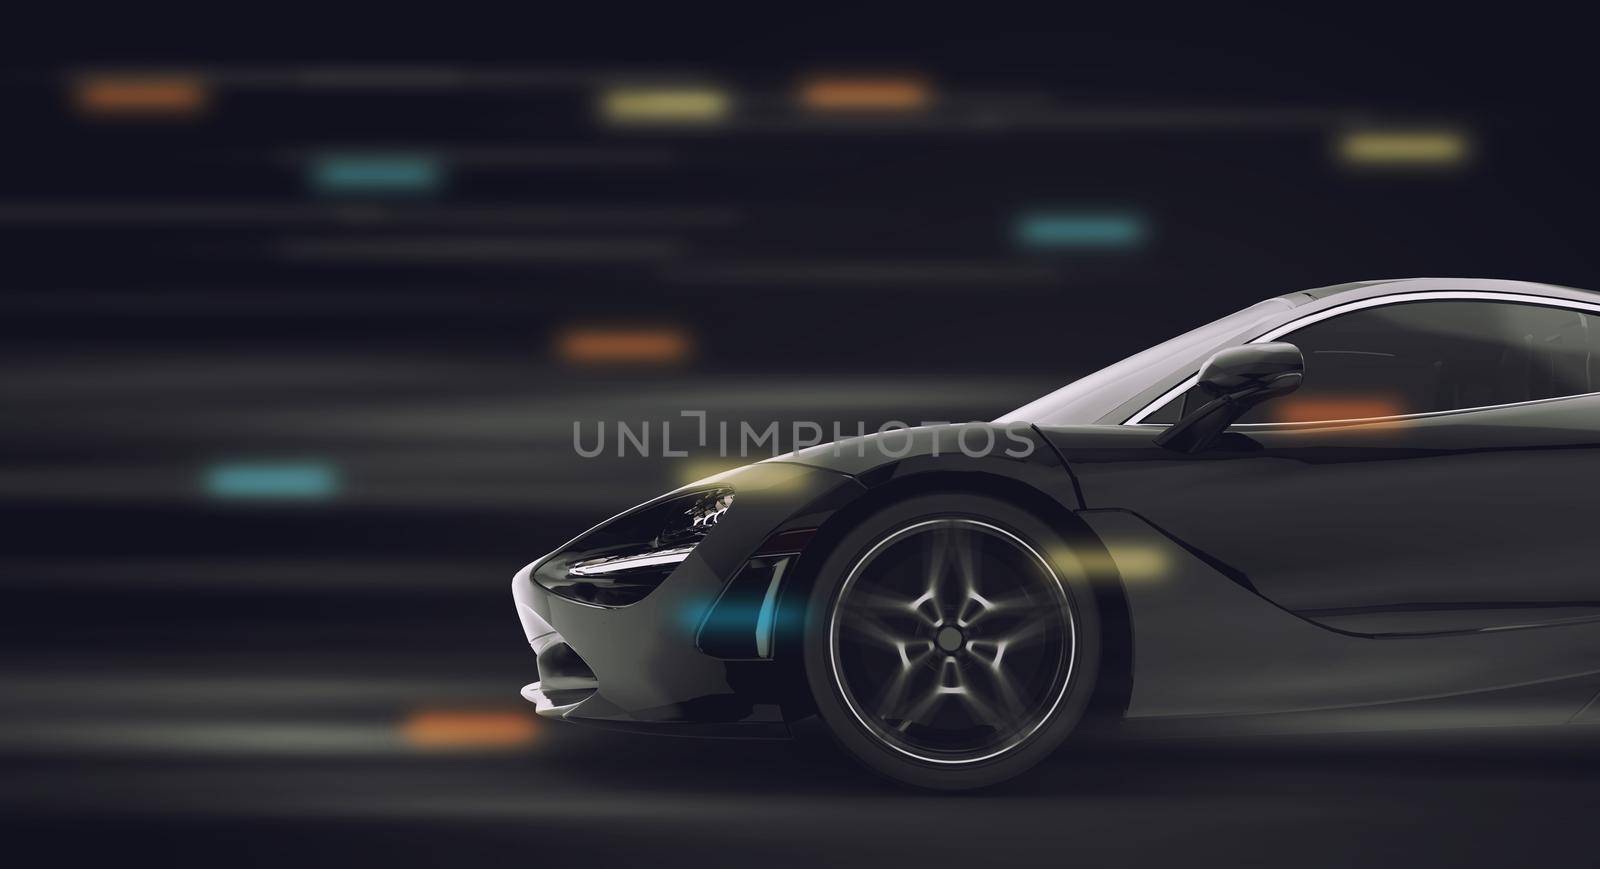 Generic and brandless sport car running in the night: 3d illustration